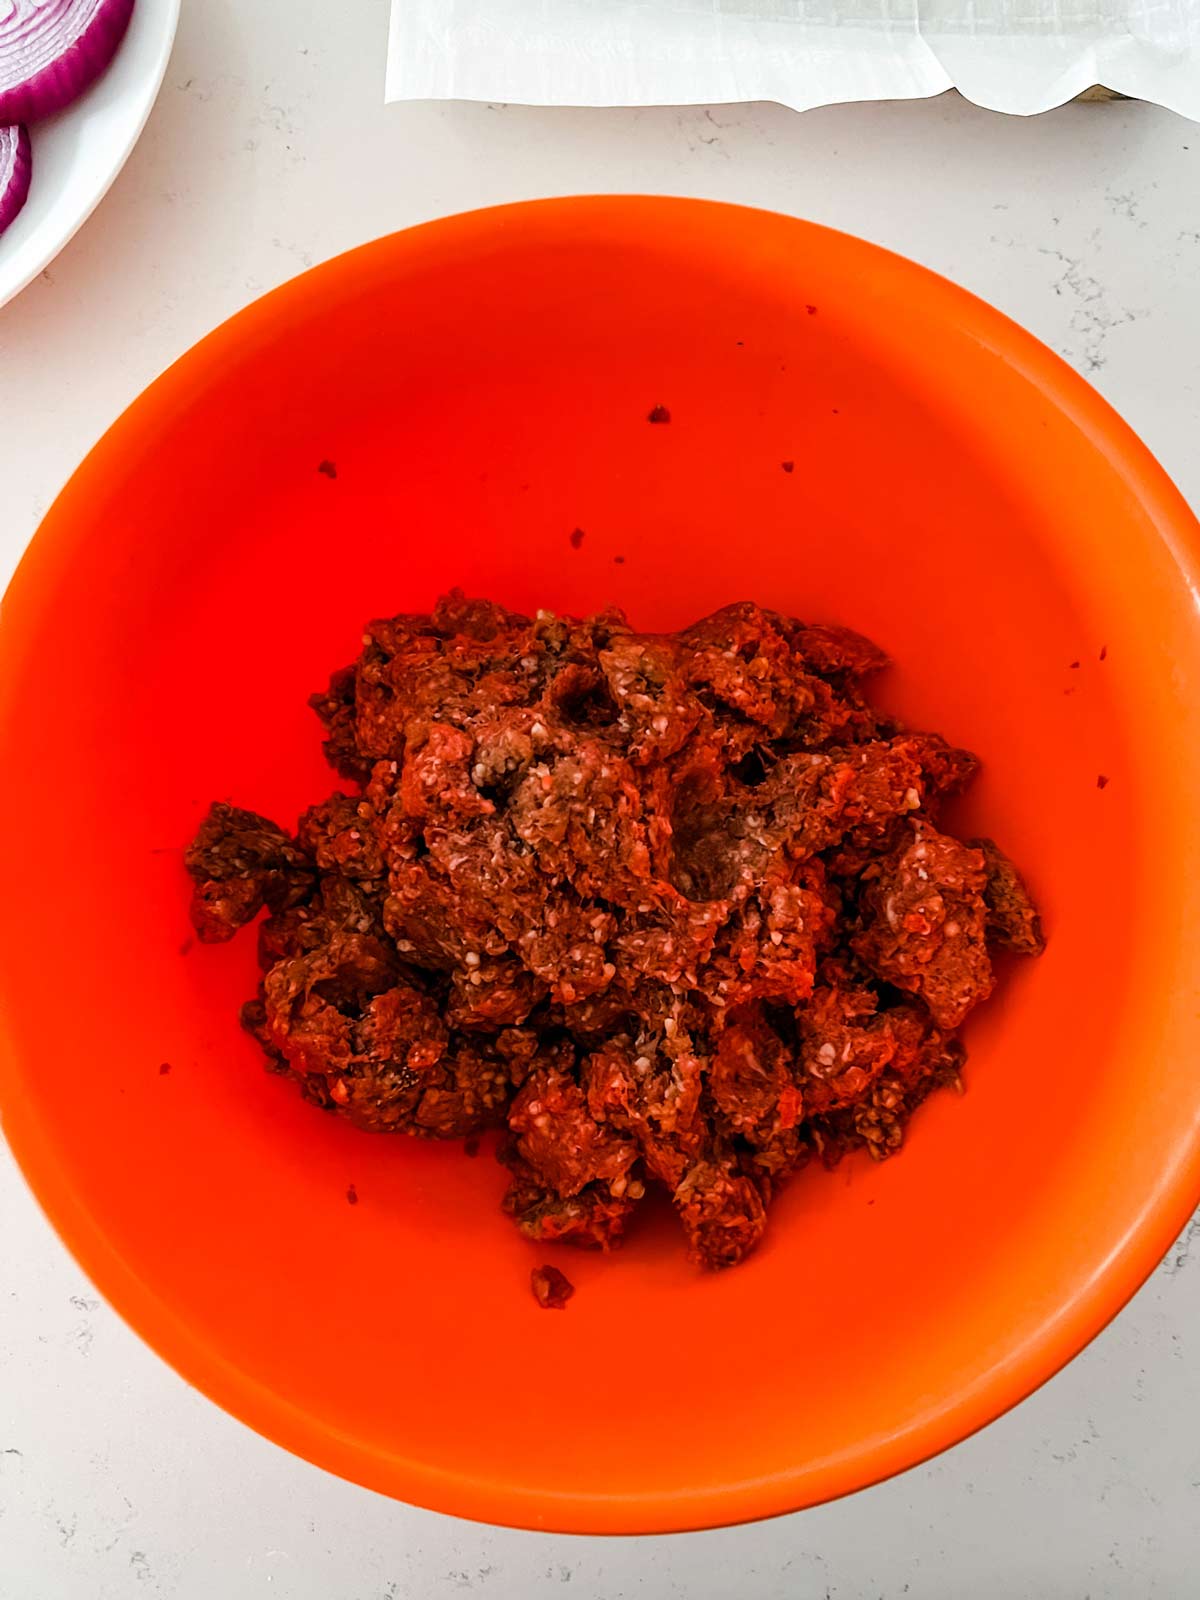 Ground beef and seasonings being mixed together in an orange bowl.